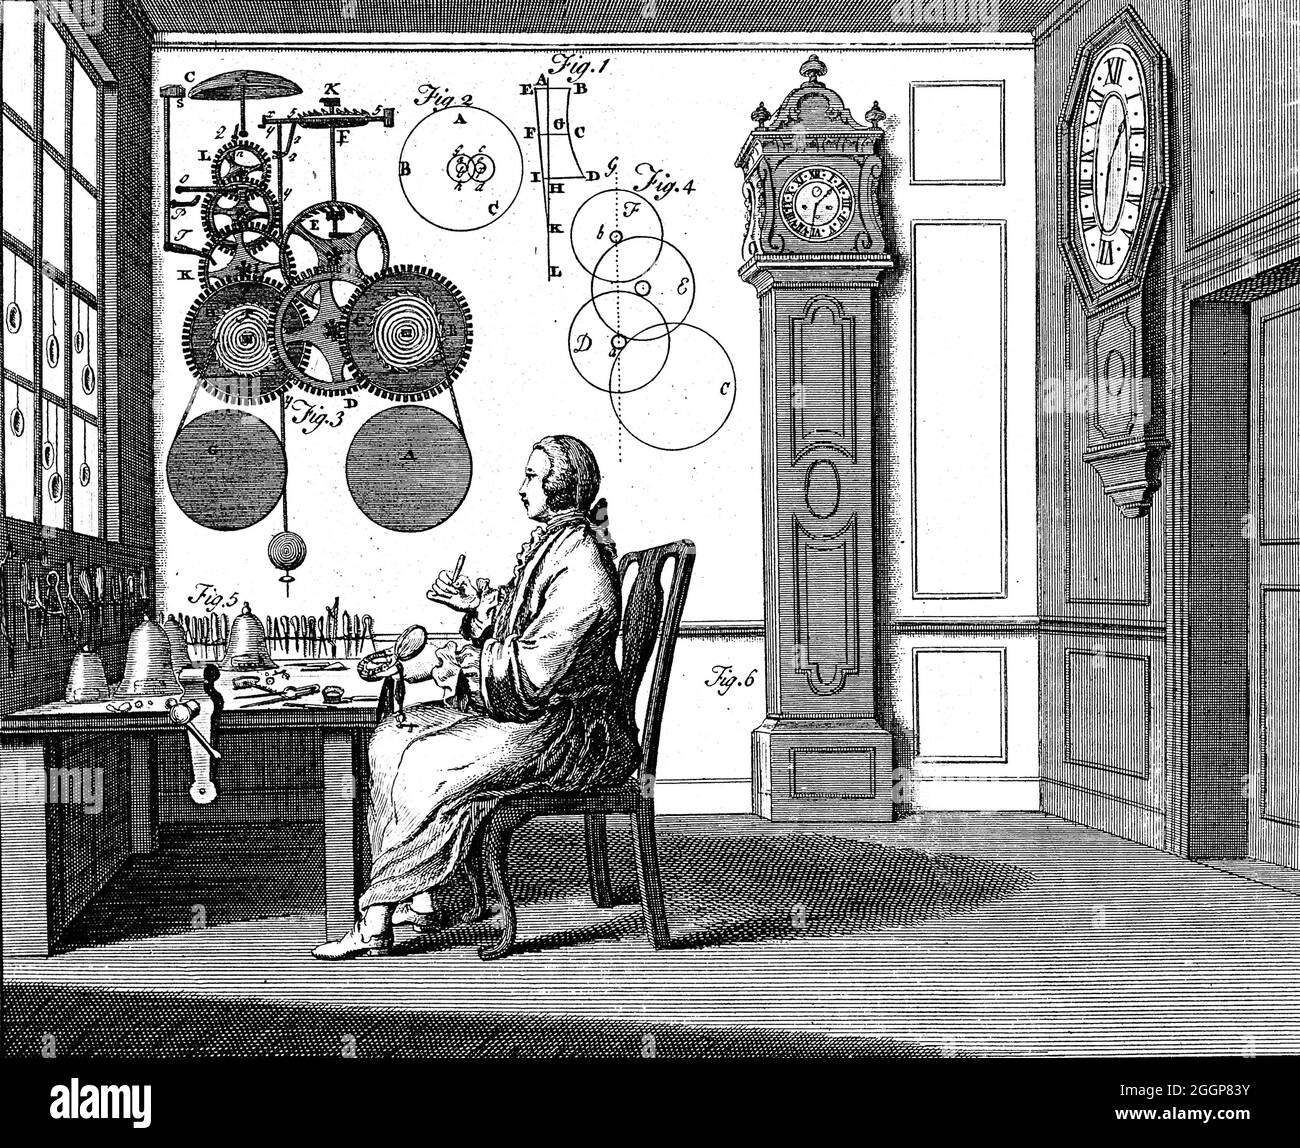 An historical illustration from 1748 showing the art of making clocks and watches. Stock Photo